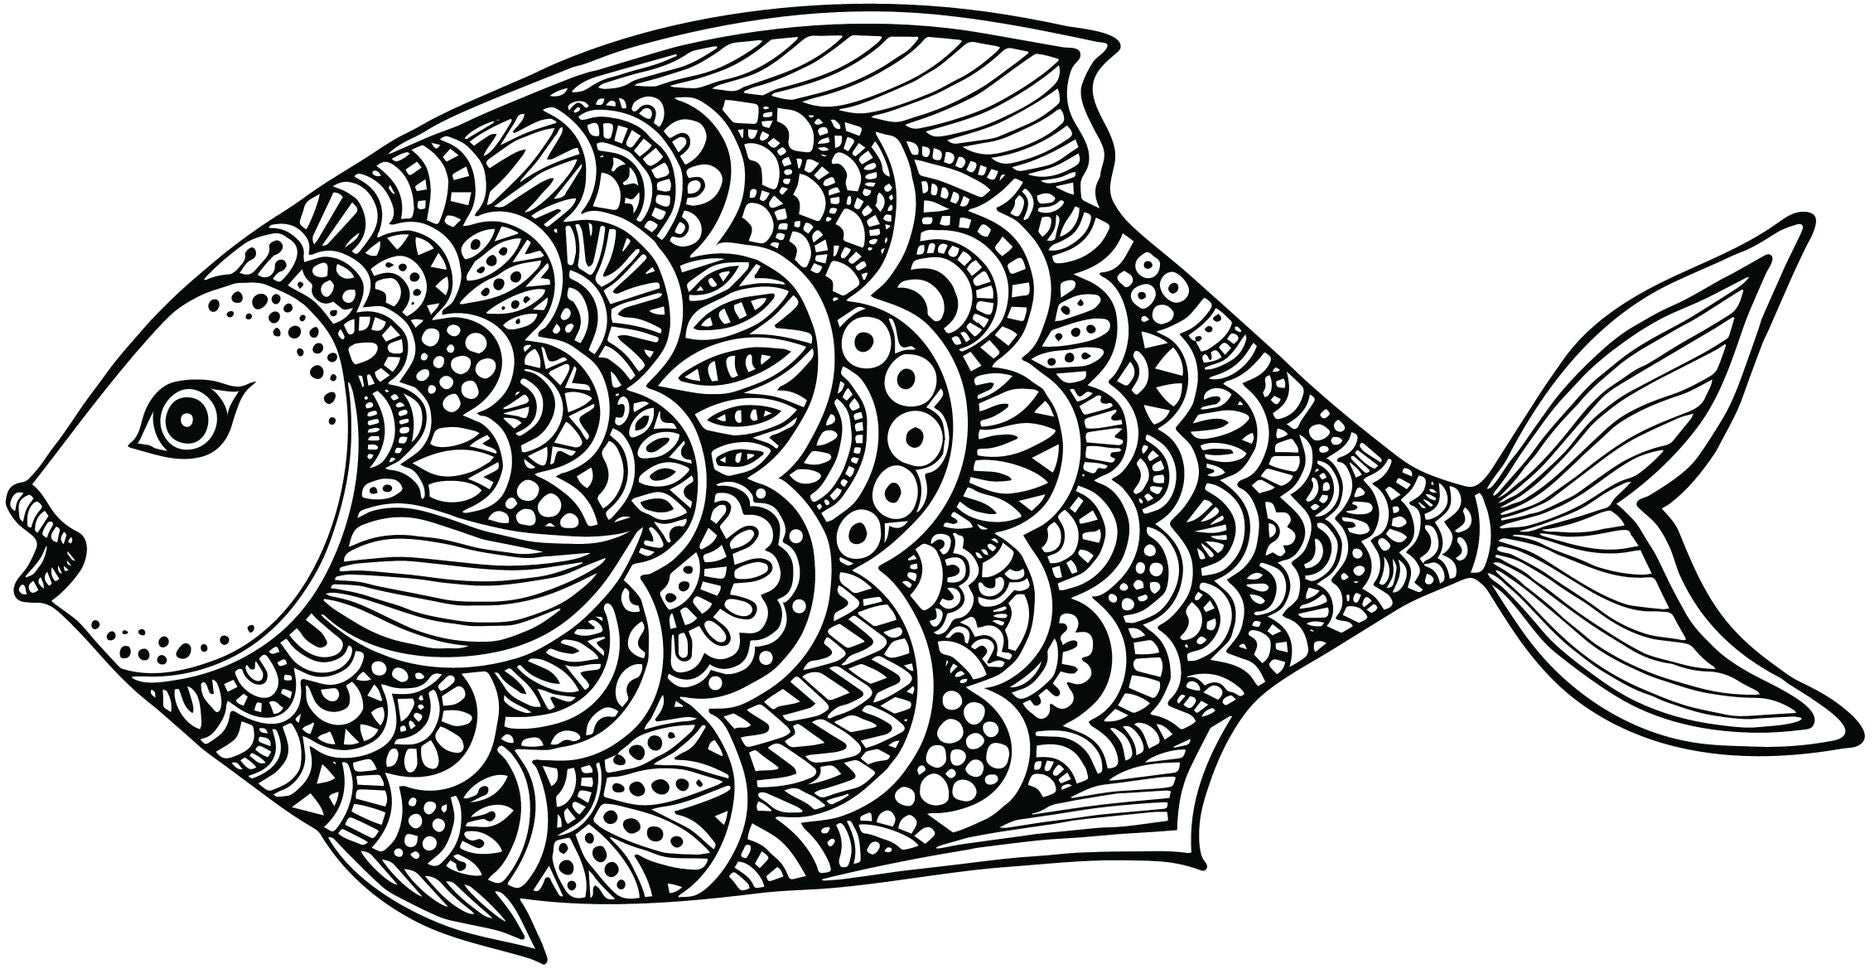 Fish with Patterned Scales Vinyl Decal Sticker